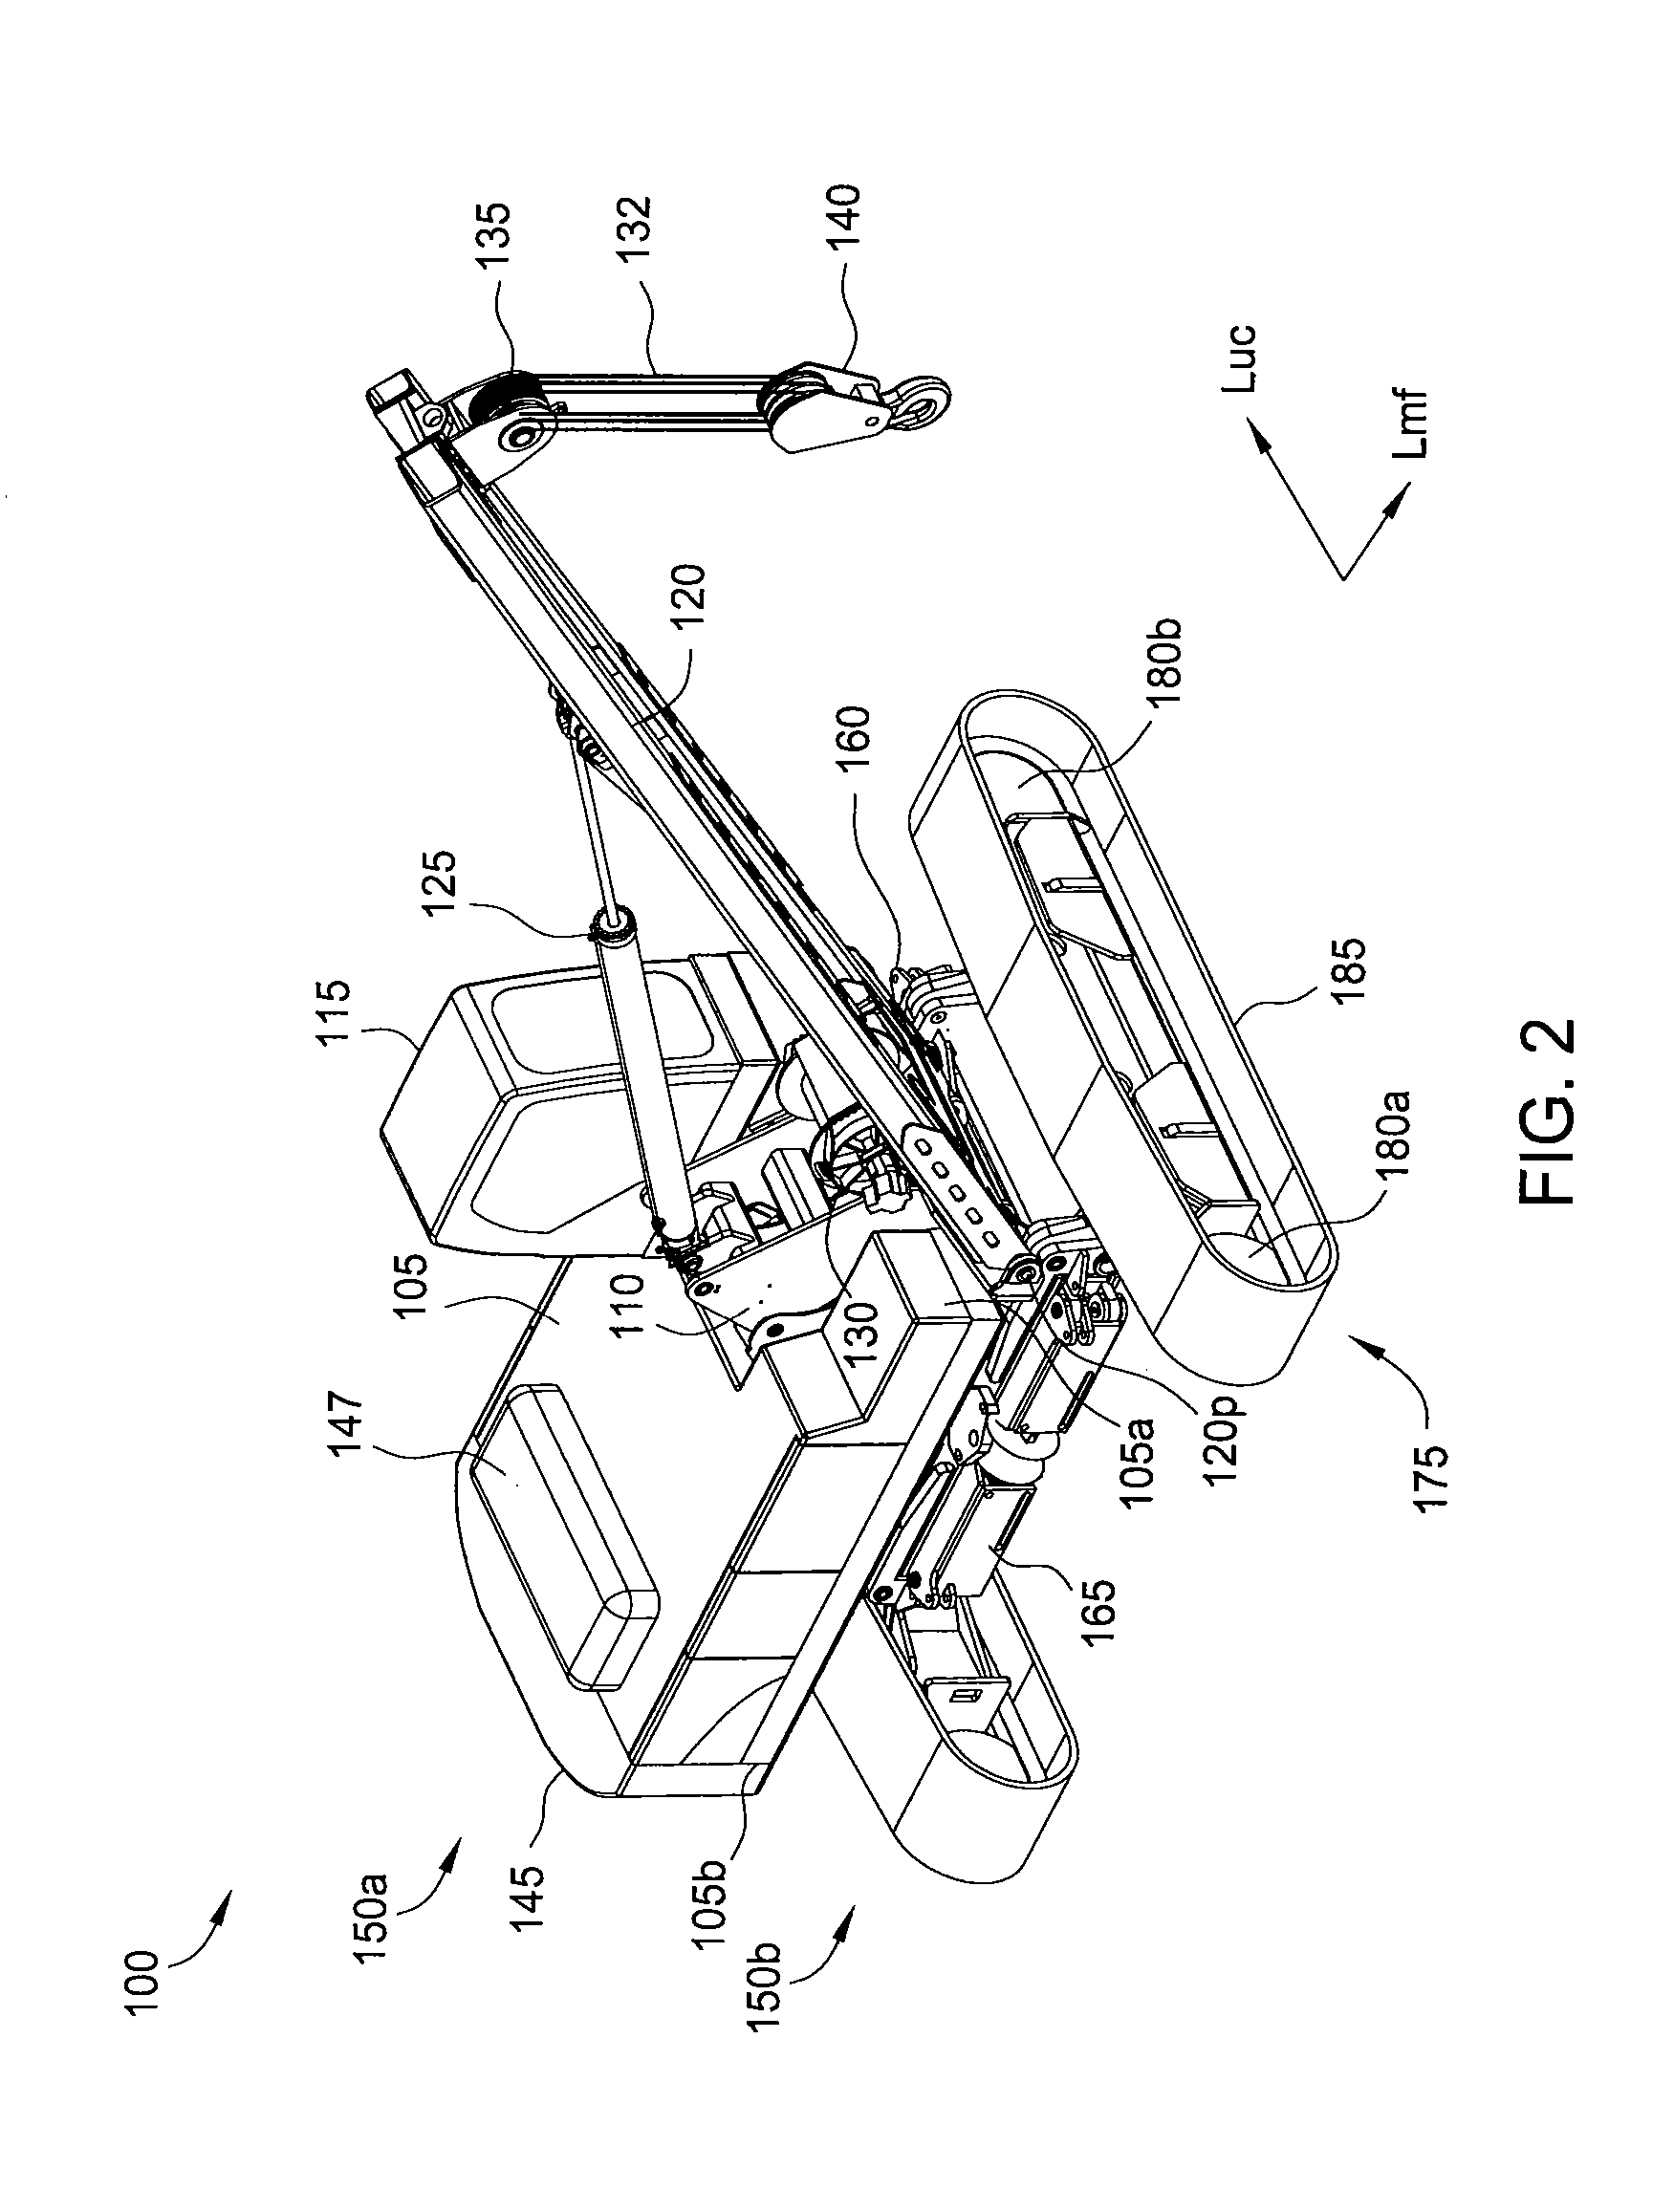 Pipelayer and method of loading pipelayer or excavator for transportation